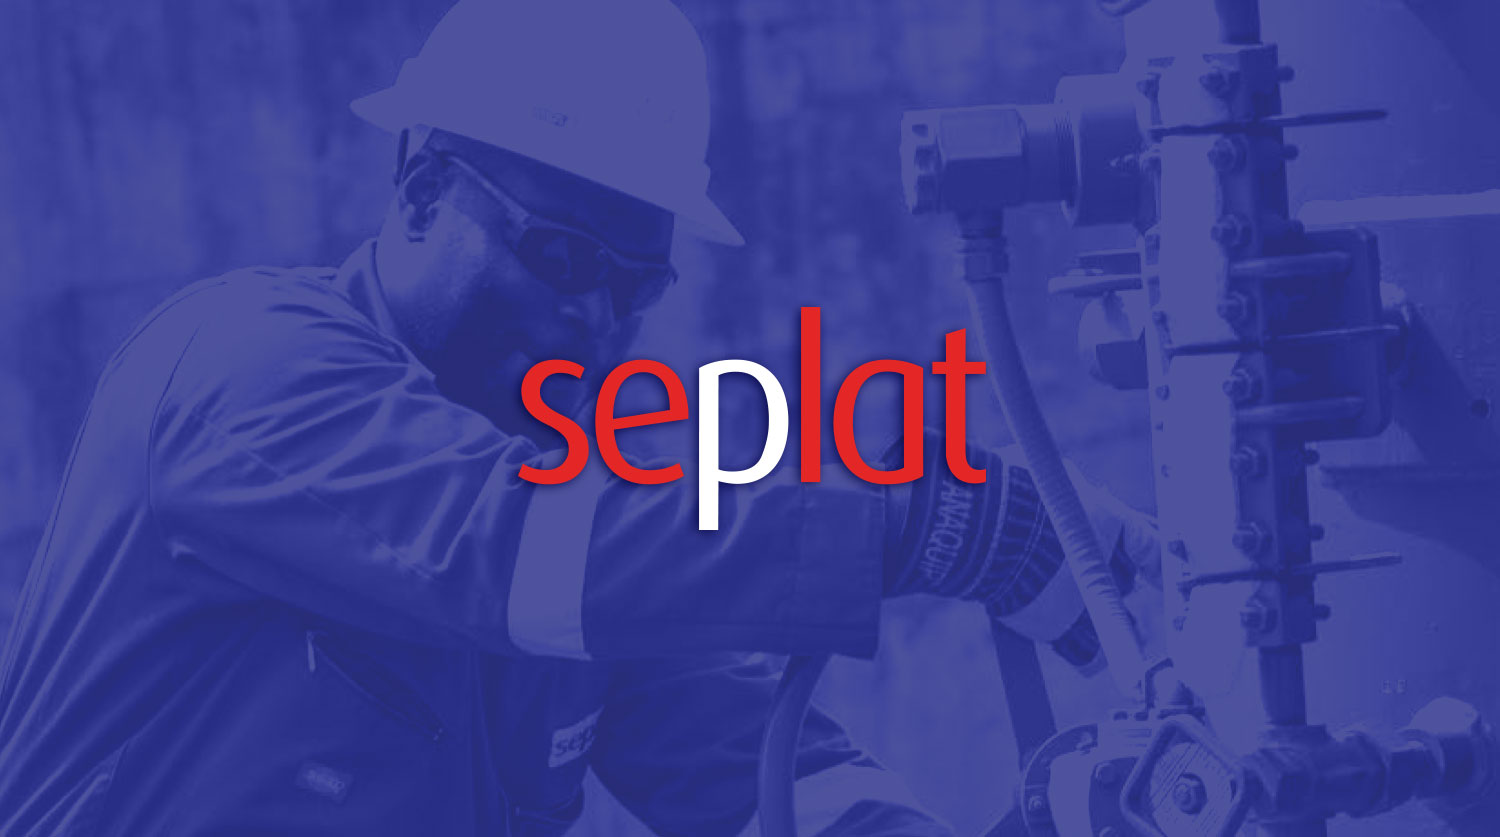 Q3 2022: Seplat records significant decline in revenue from N62bn to N39bn